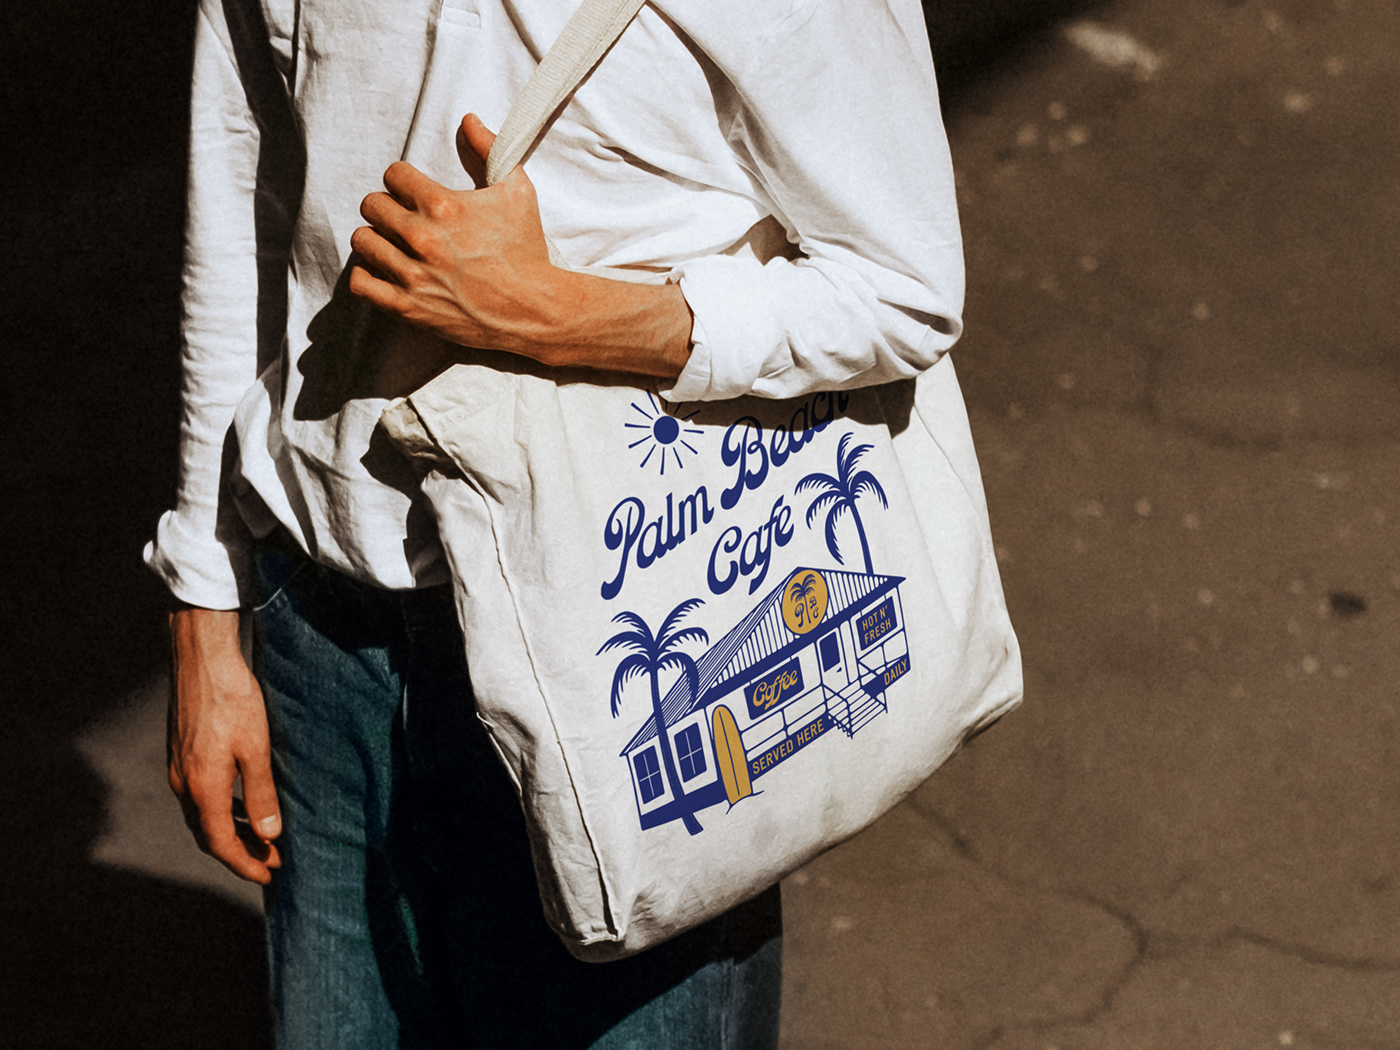 Image of a man wearing a cafe branded tote bag